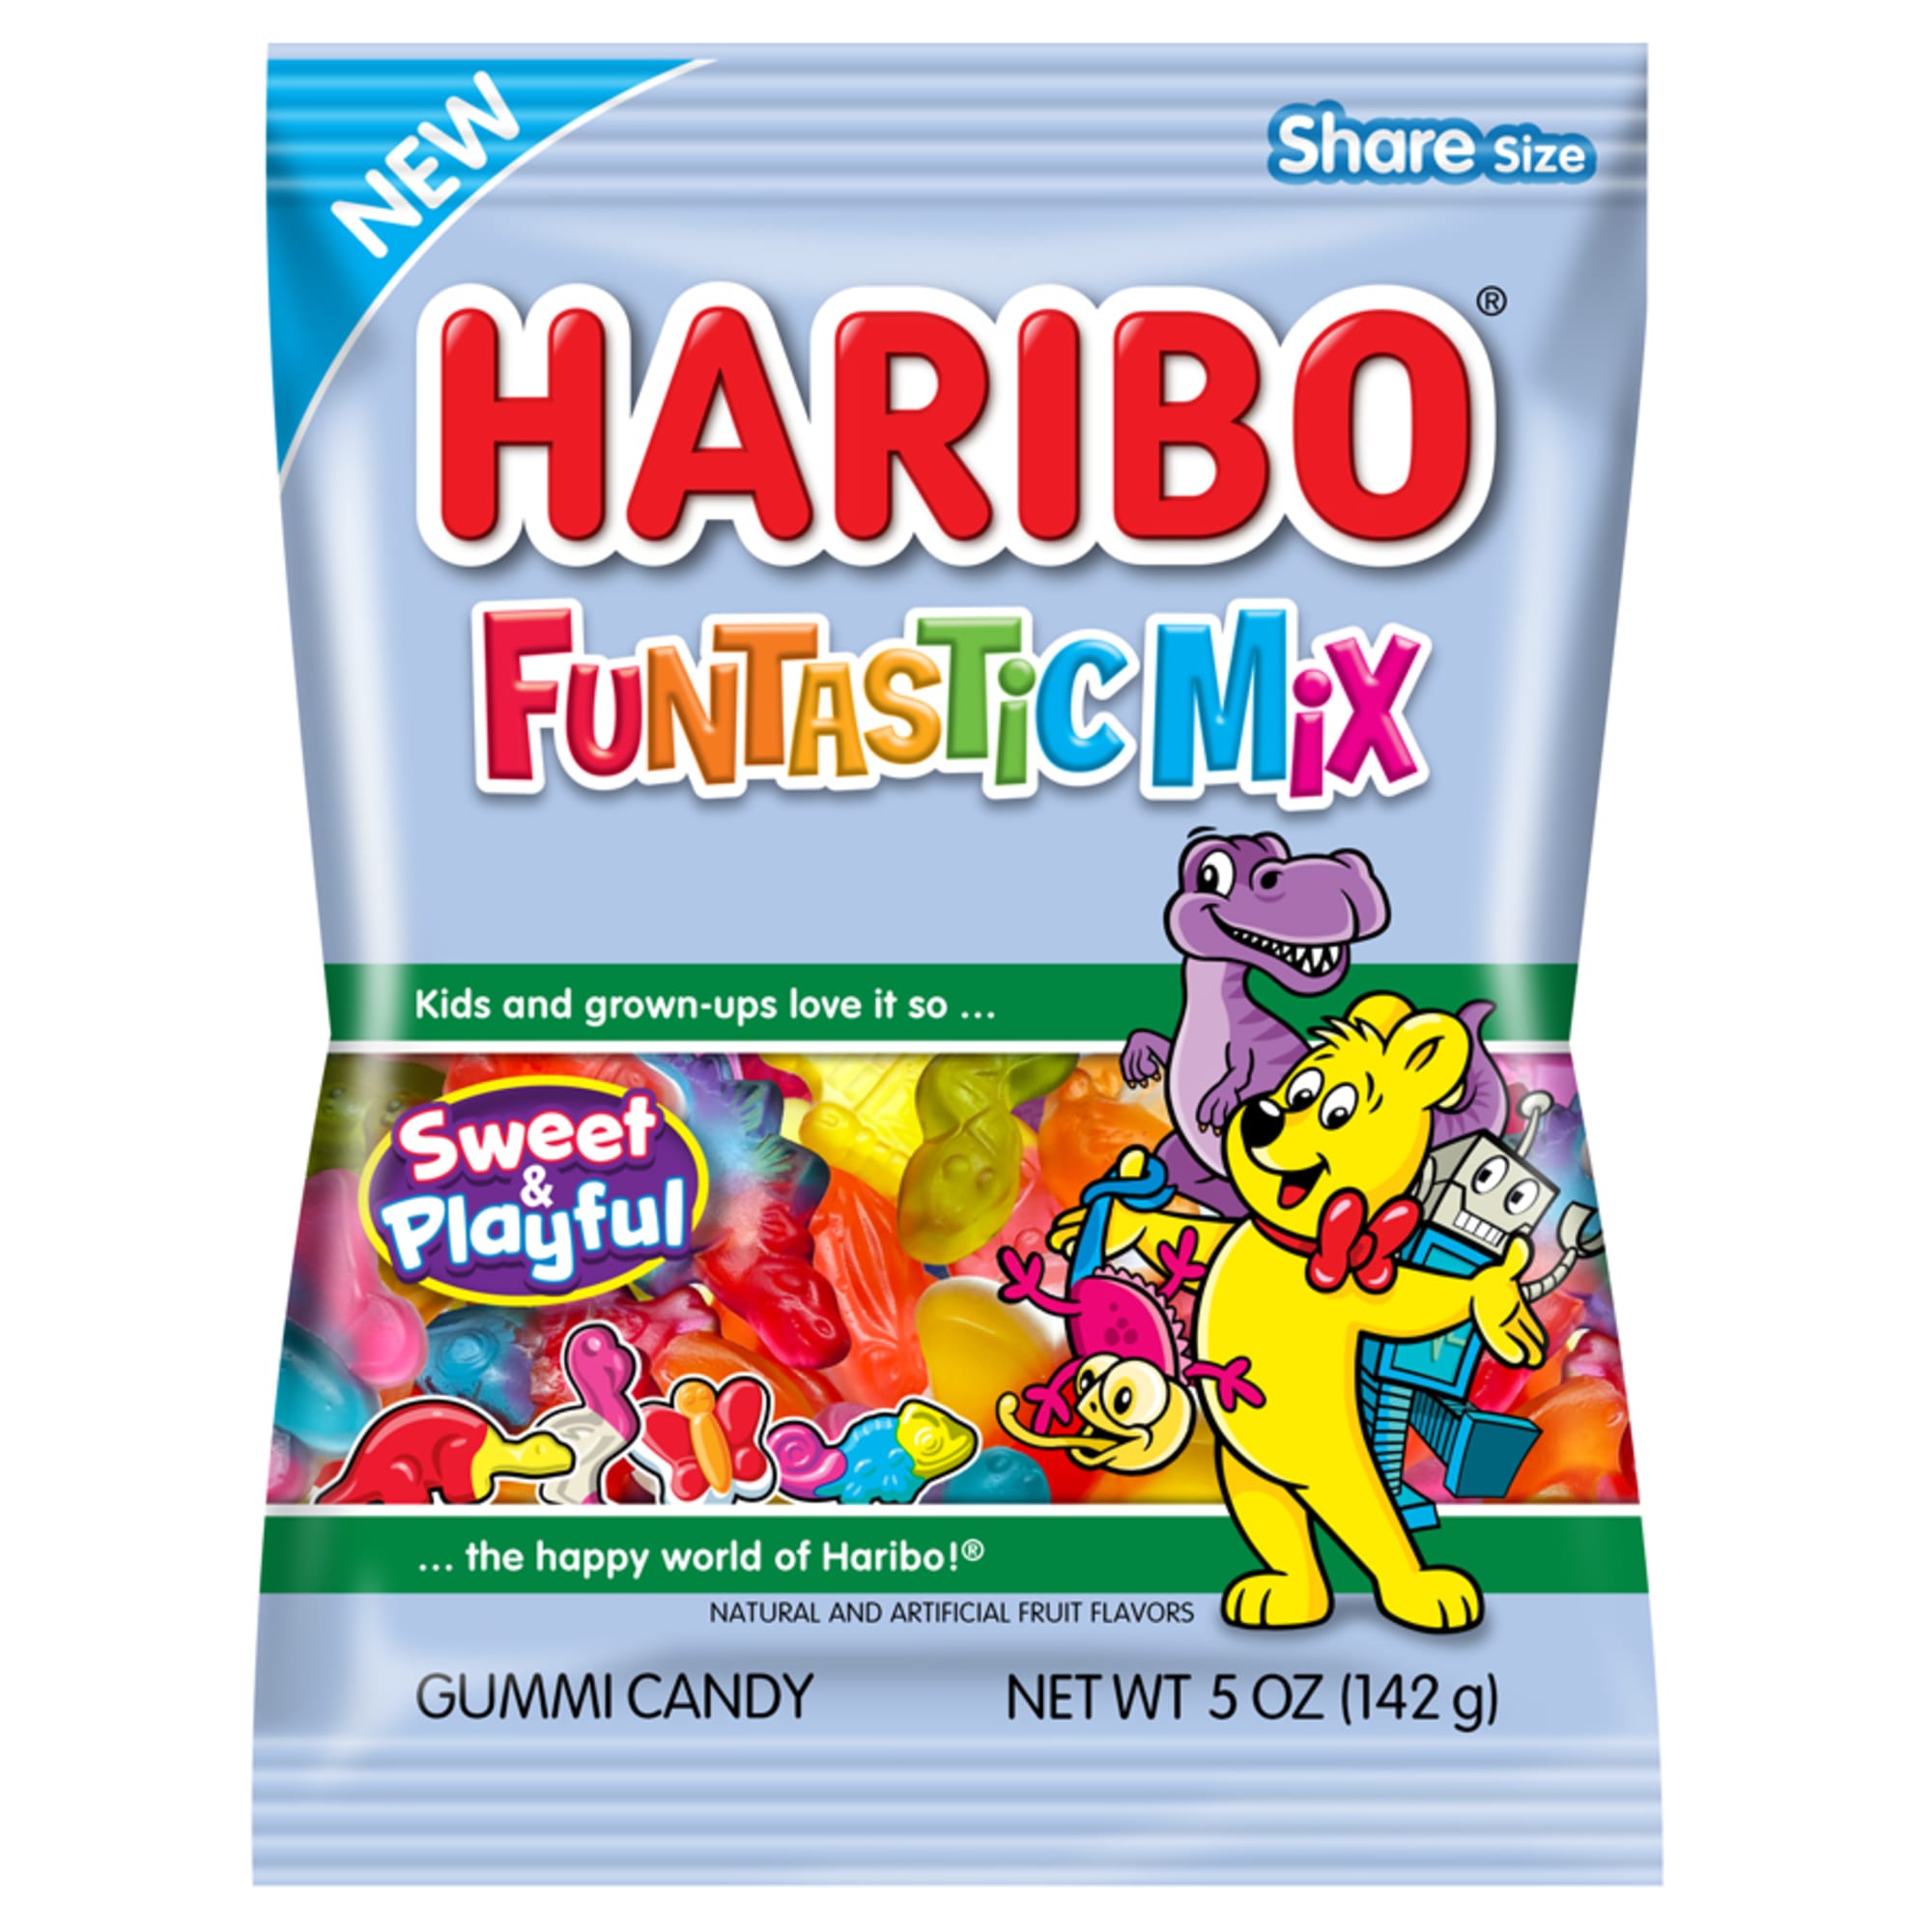 Haribo Funtastic Mix Innovates With Form And Flavor